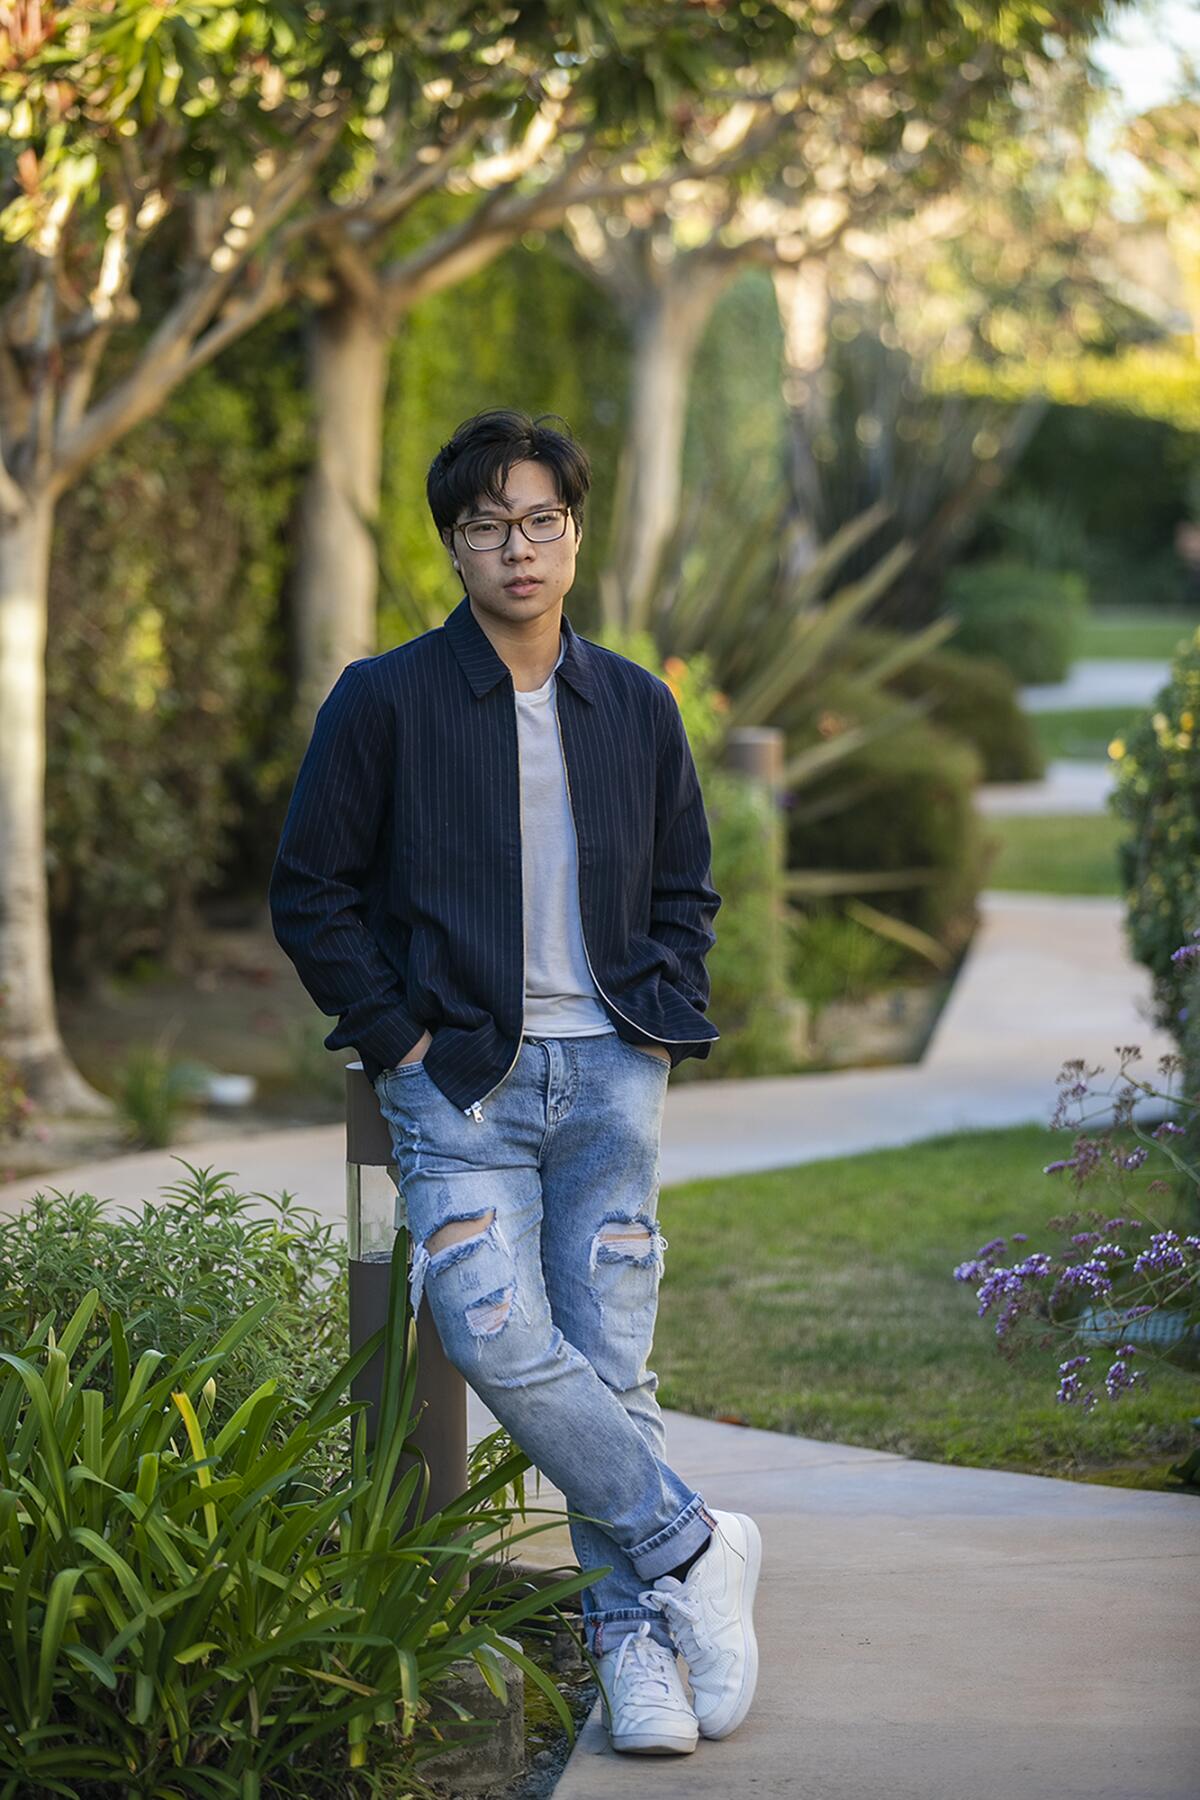 James Nguyen immigrated to the U.S. from Vietnam in the summer of 2019.